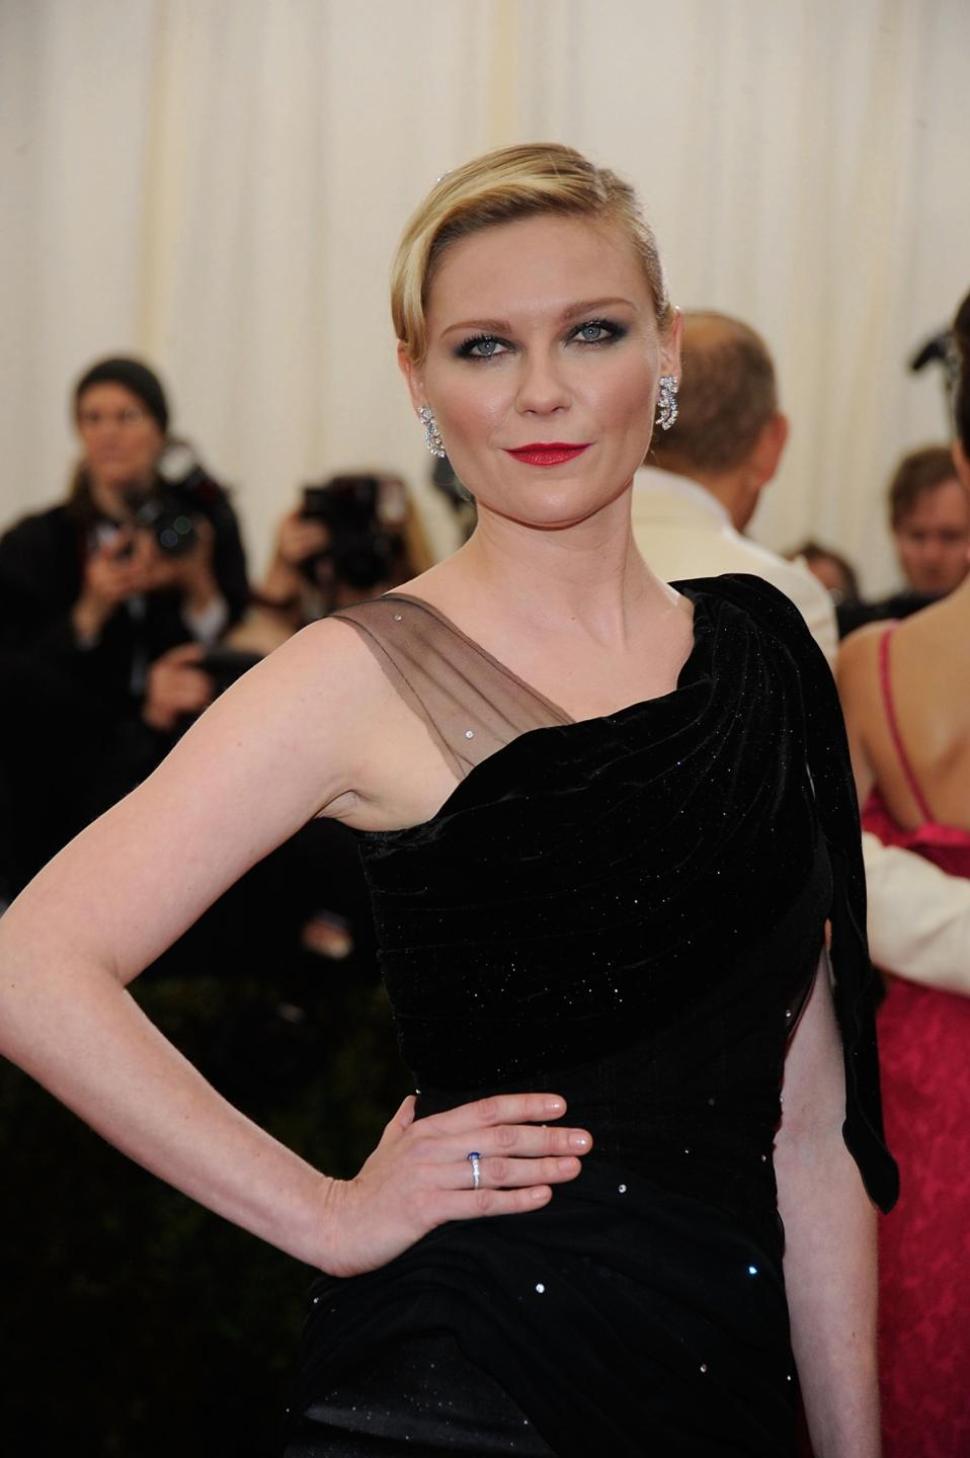 Kirsten Dunst is apparently among the celebrities whose nude pictures were hacked.